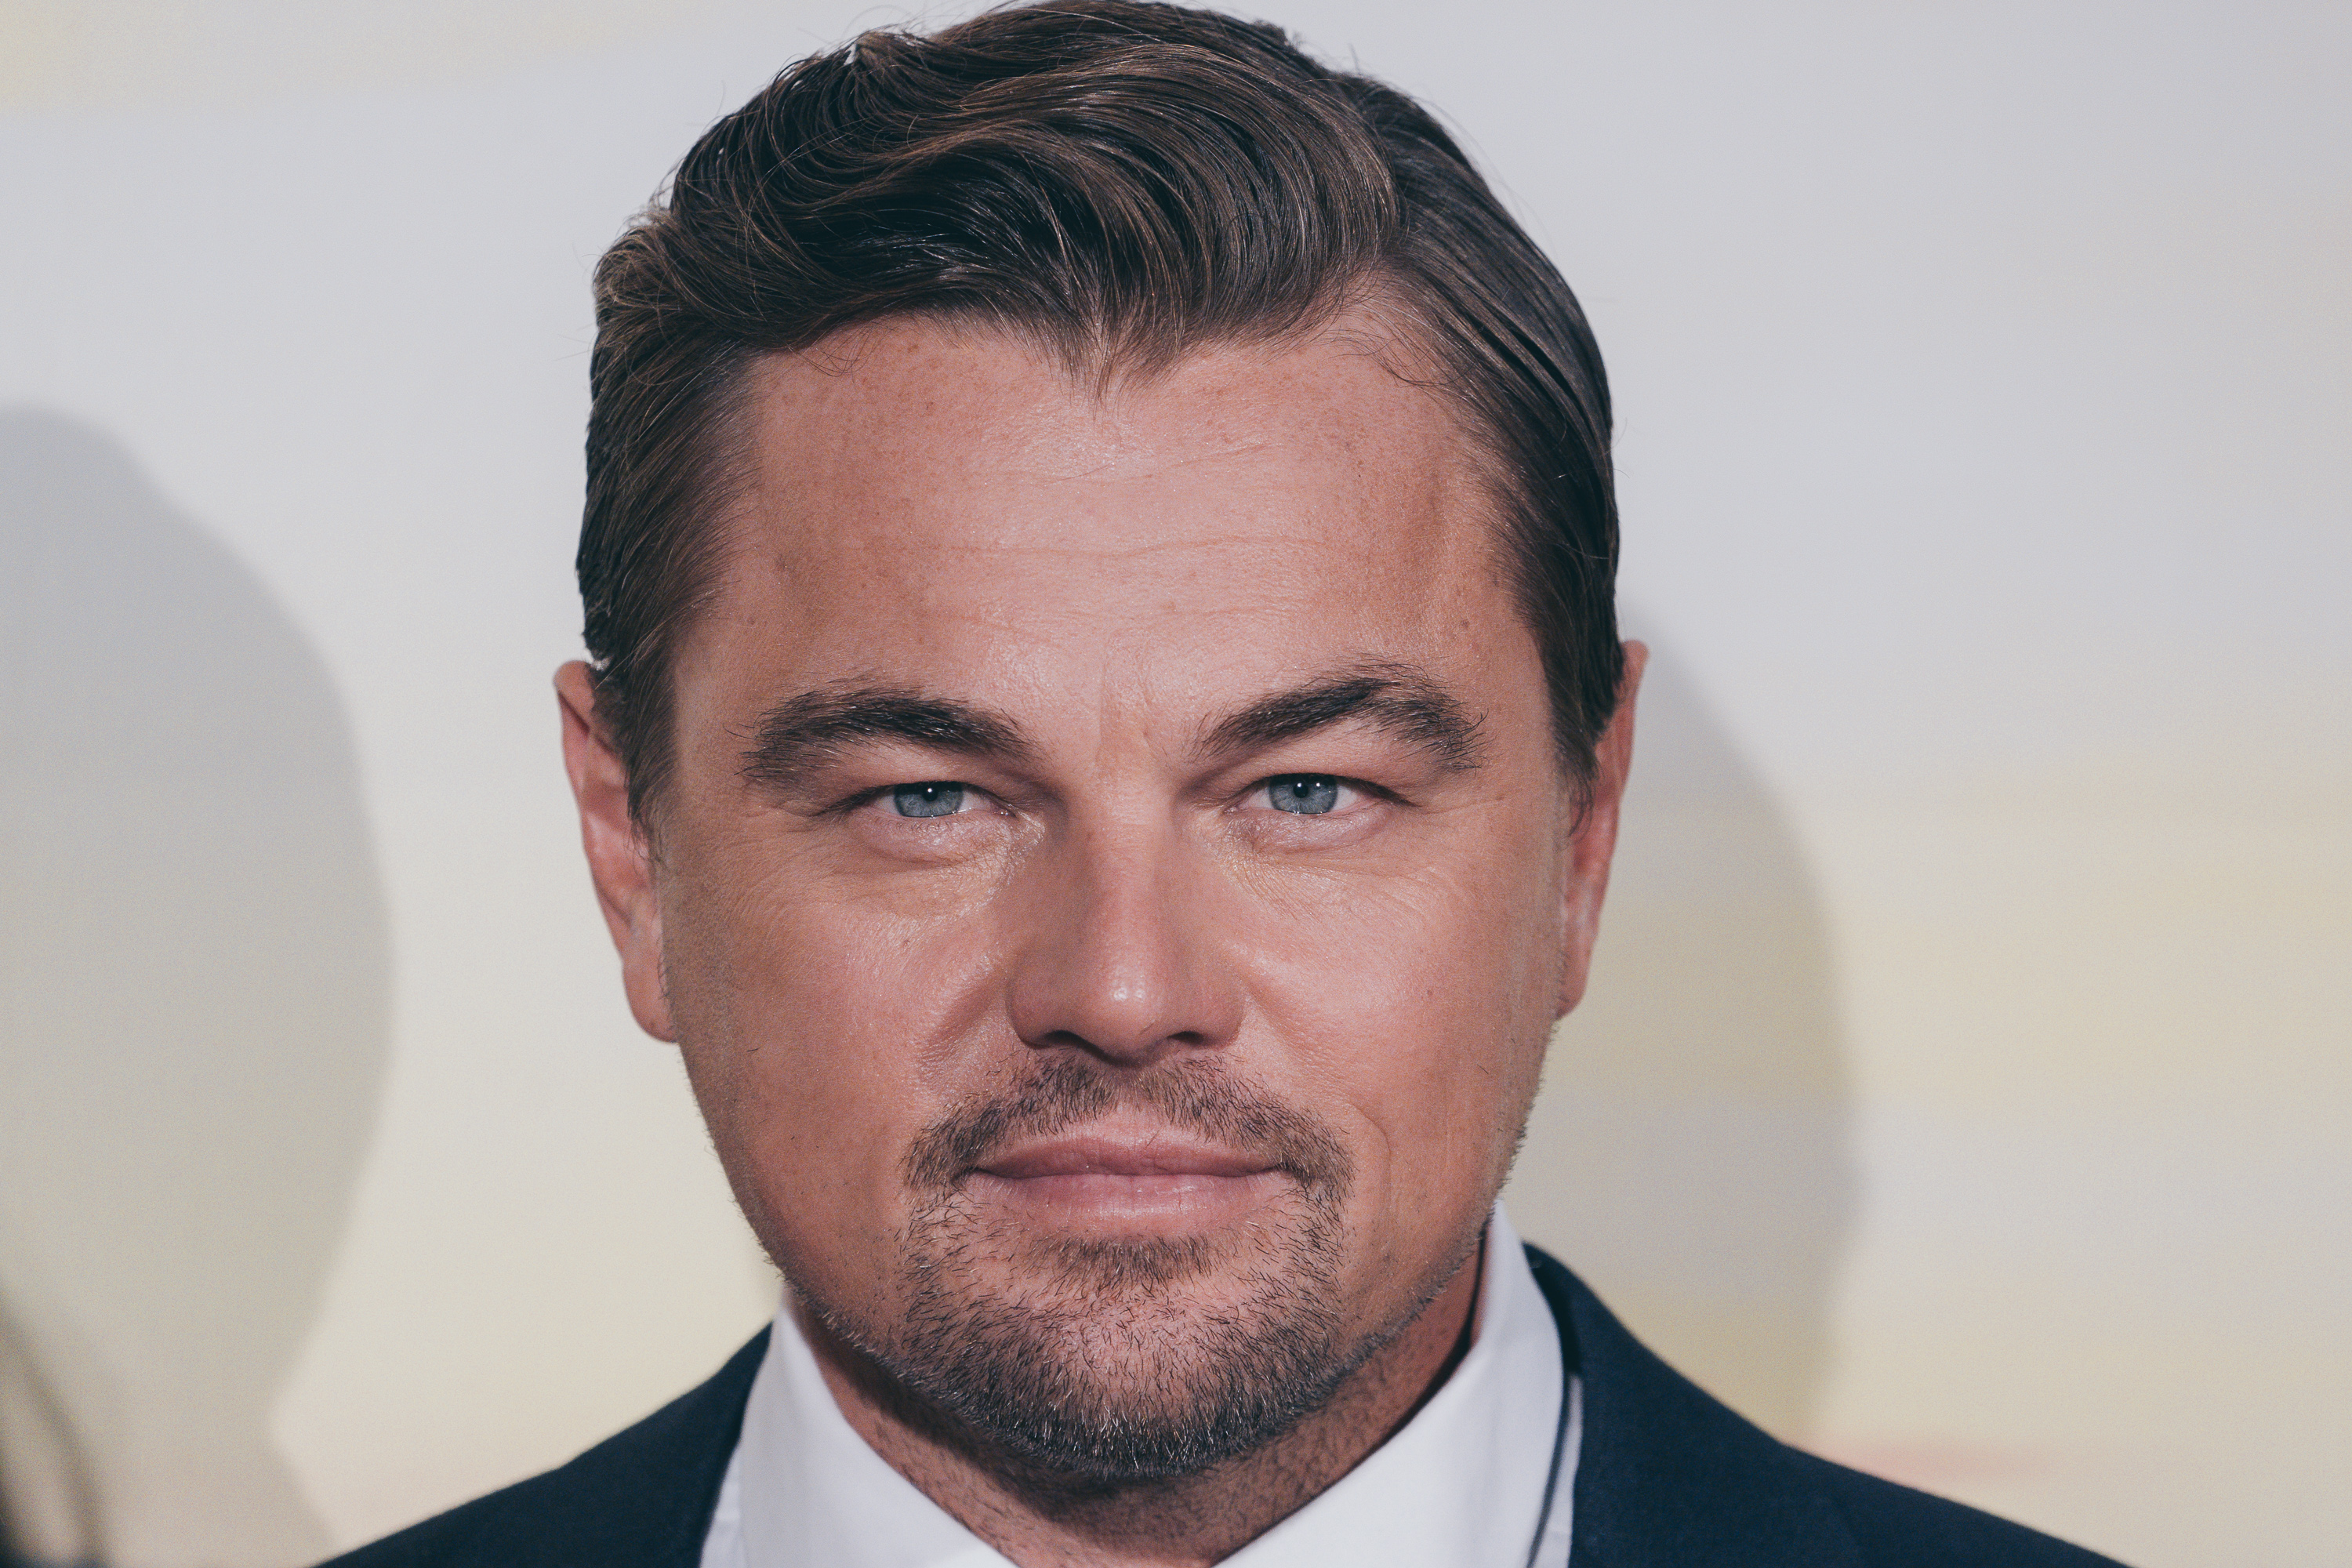 Leonardo DiCaprio besucht die "Once Upon a Time in Hollywood"-Premiere am 2. August 2019 in Rom, Italien | Quelle: Getty Images